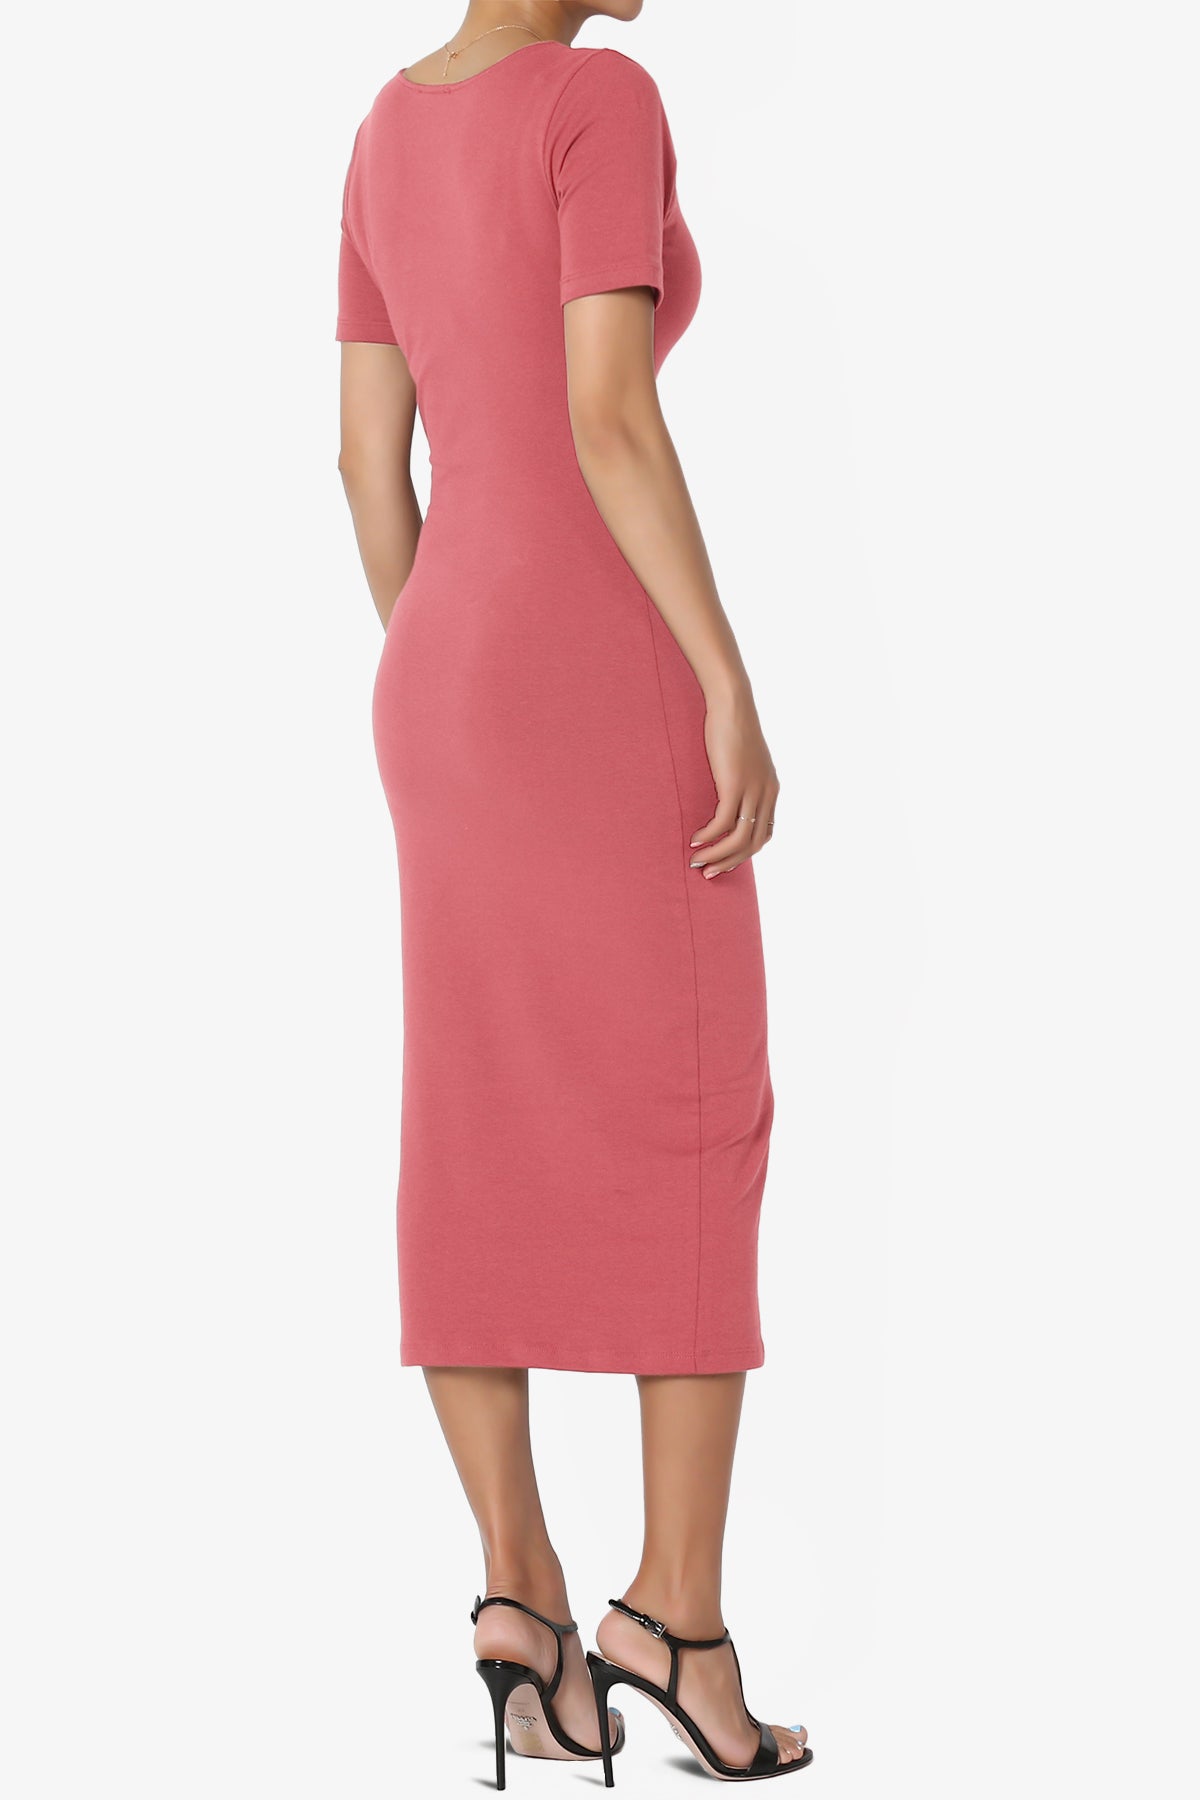 Load image into Gallery viewer, Fontella Short Sleeve Square Neck Bodycon Dress ROSE_4
